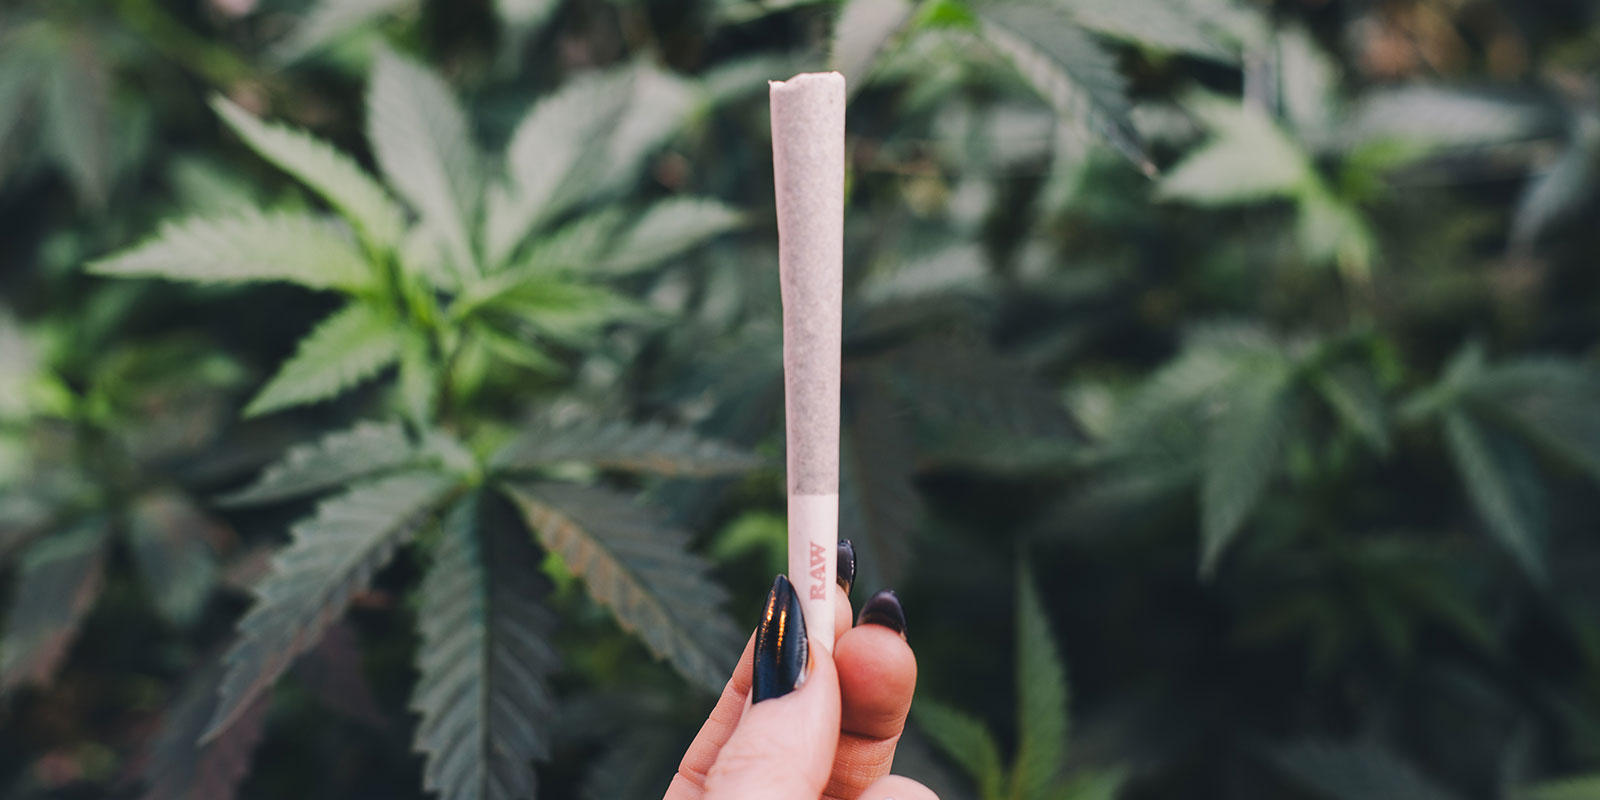 a cannabis joint being held in one hand